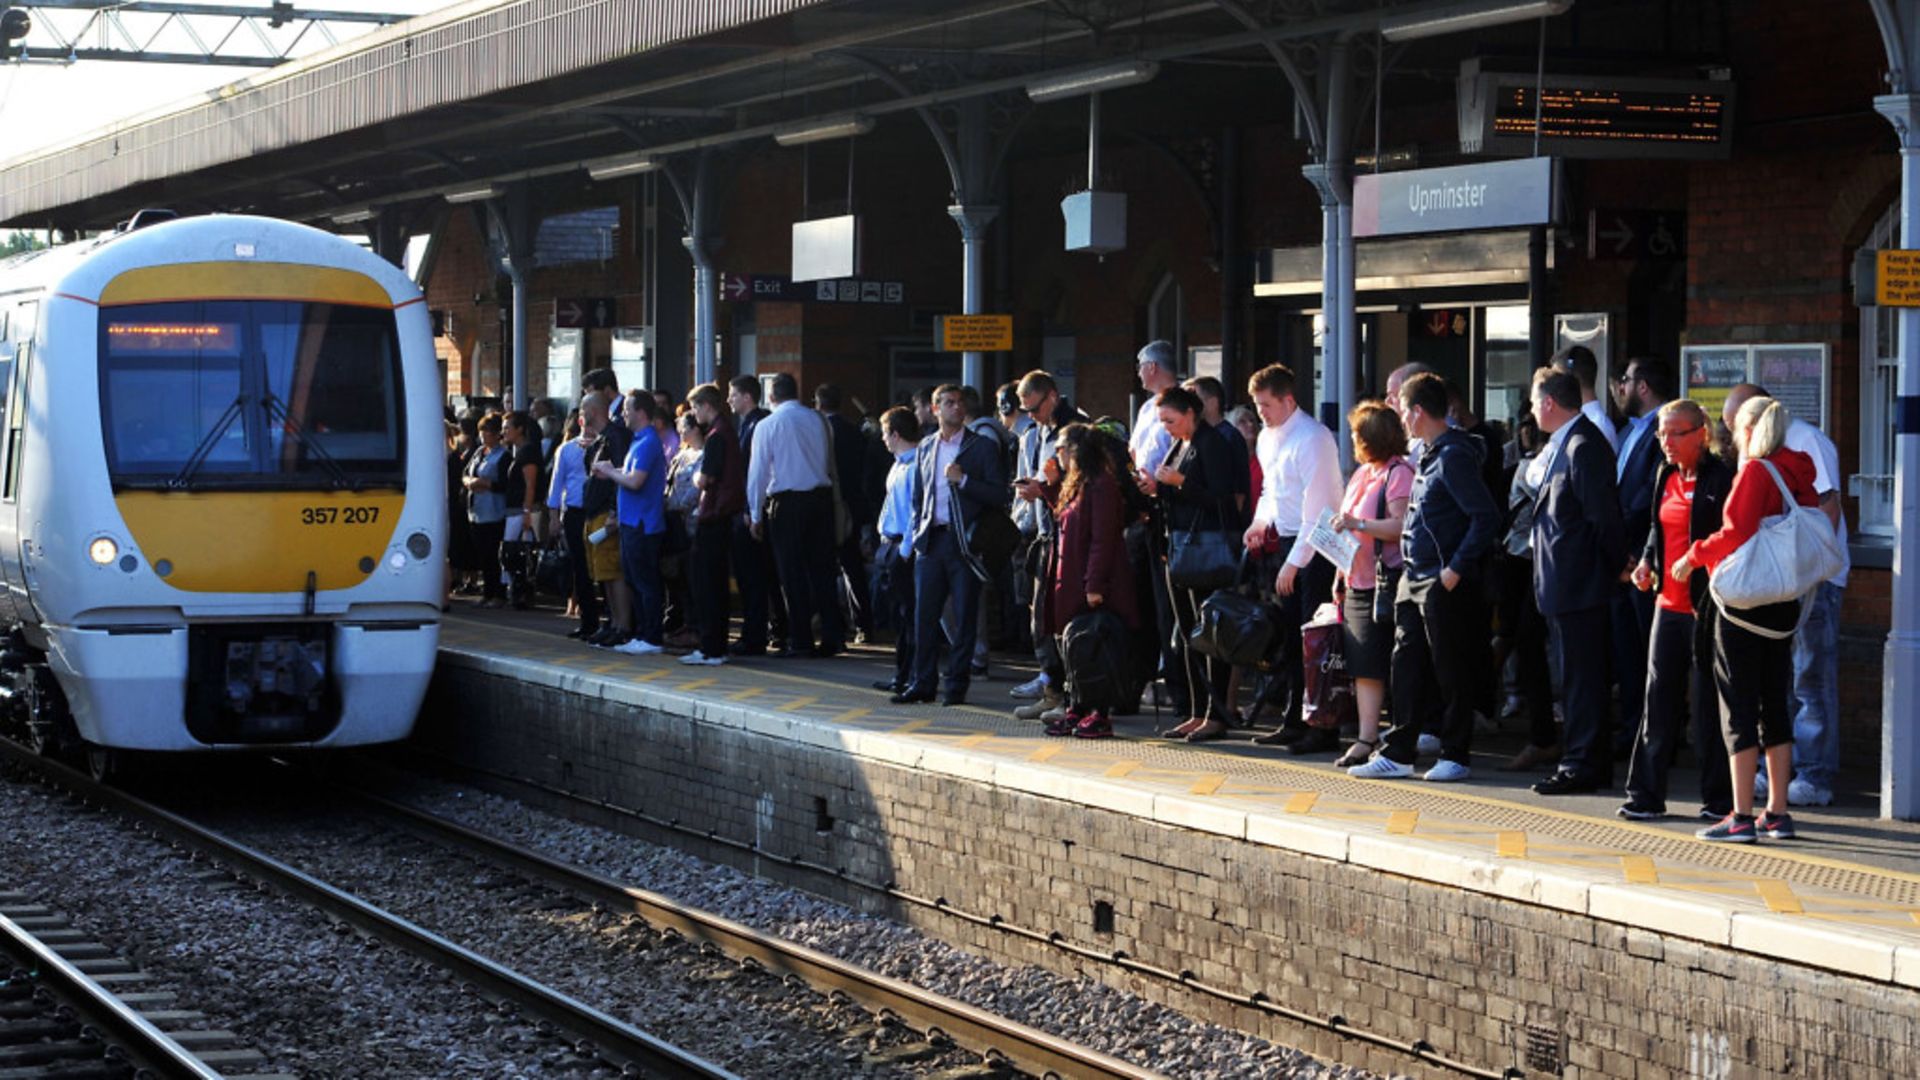 Commuters waiting for a train on the c2c line. - Credit: PA WIRE